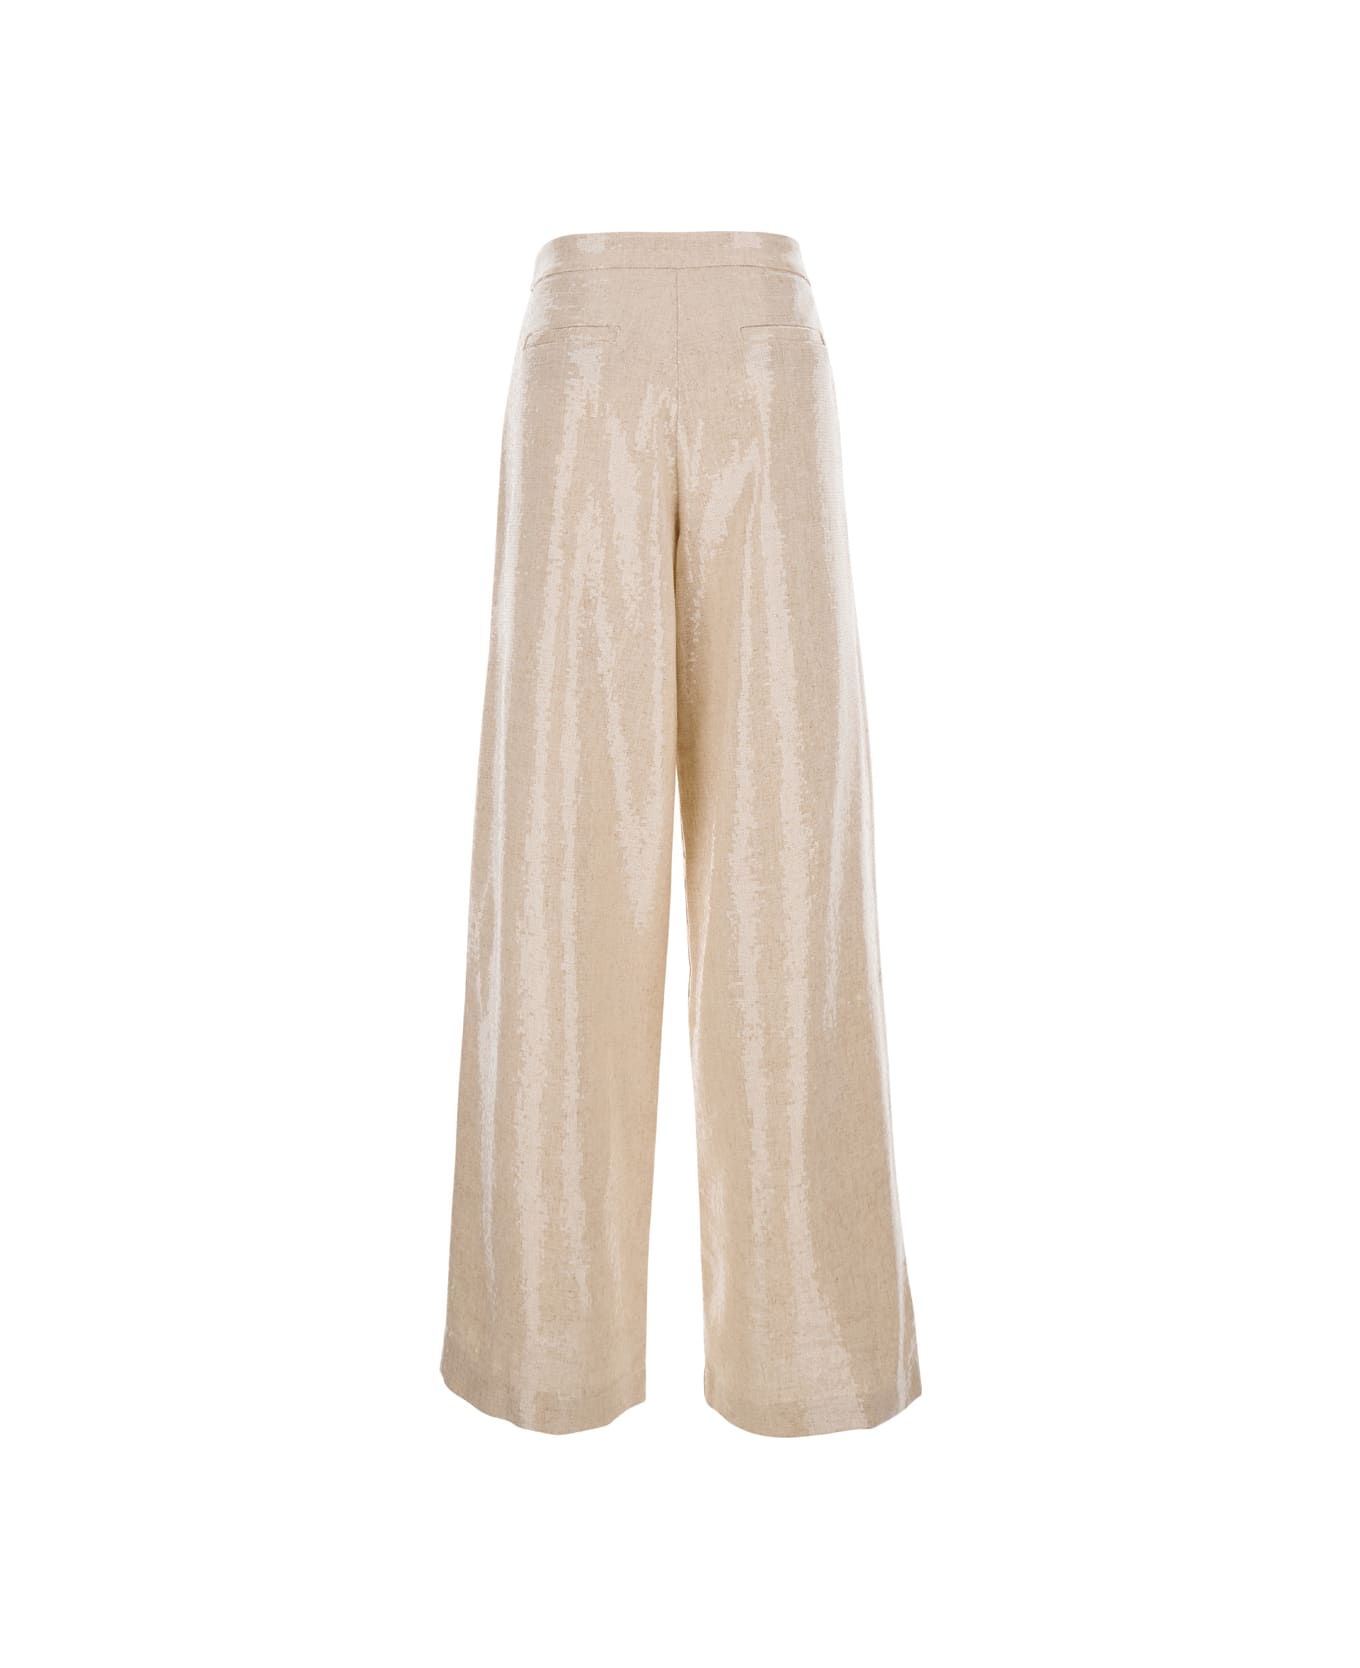 Federica Tosi Pink Trousers With Sequins In Linen Blend Woman - Beige ボトムス